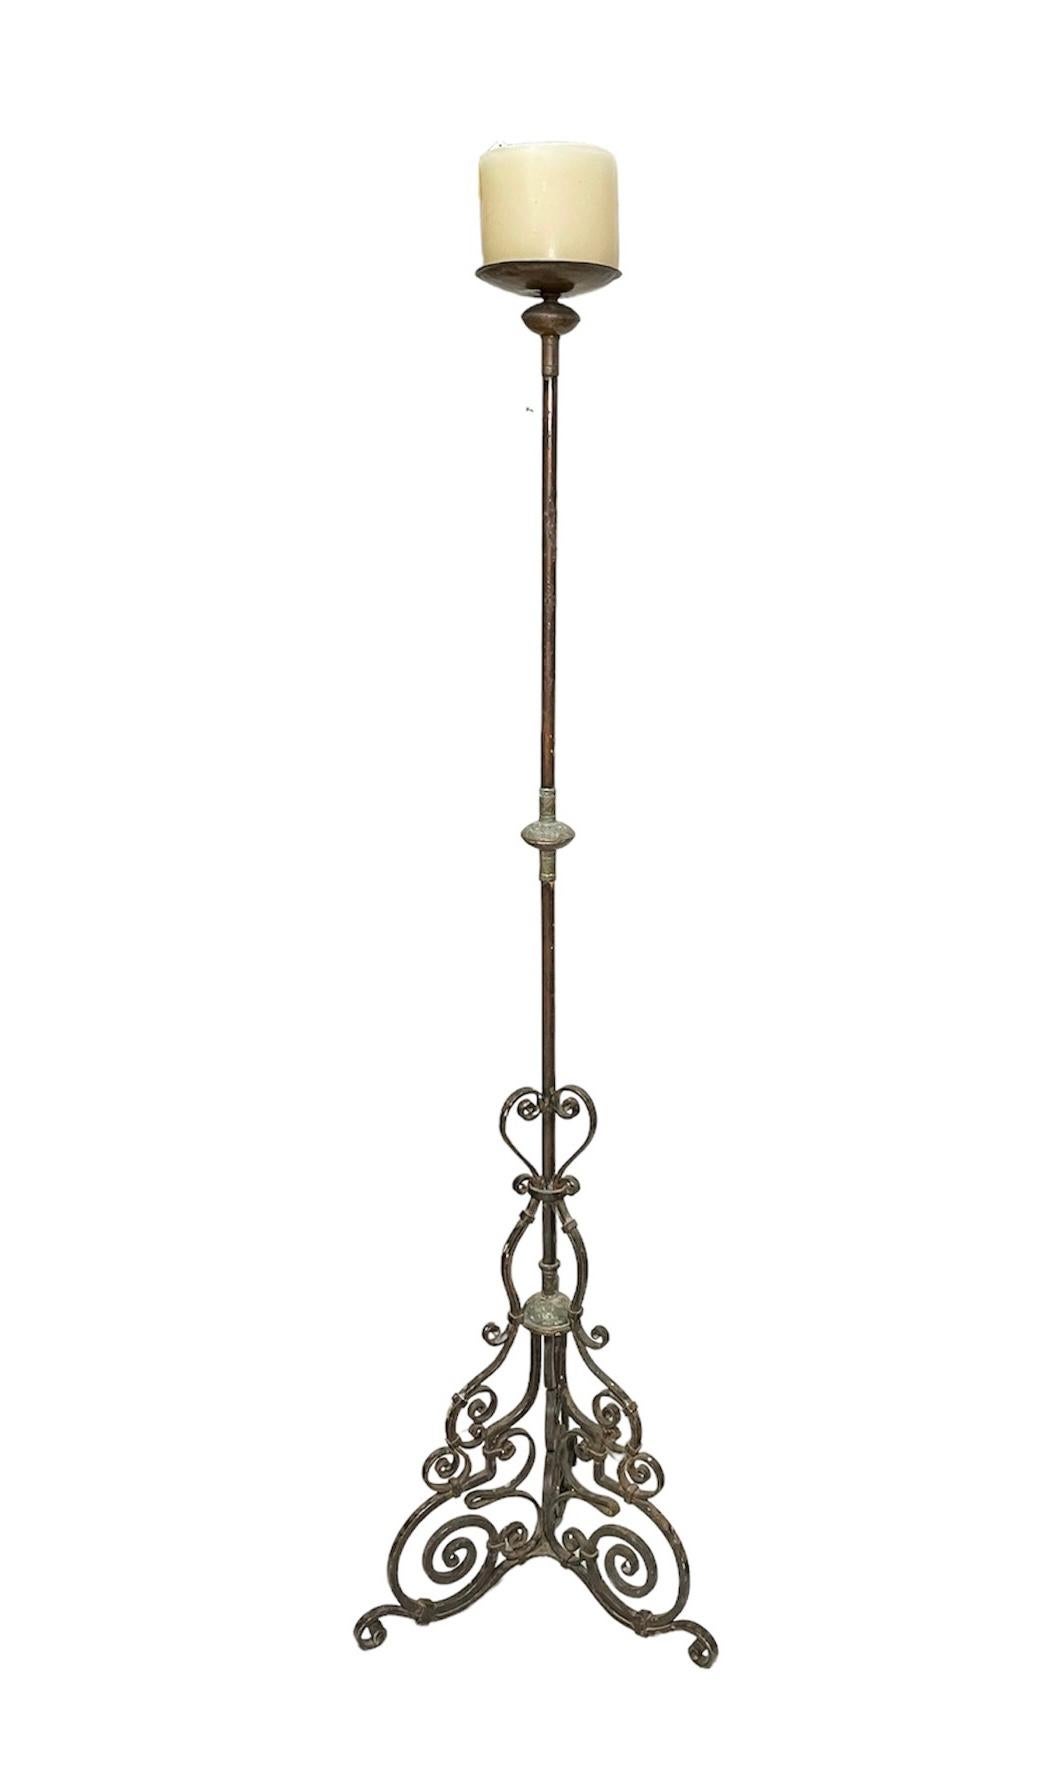 Gothic Style Wrought Iron Candle holder/Torchere For Sale 8